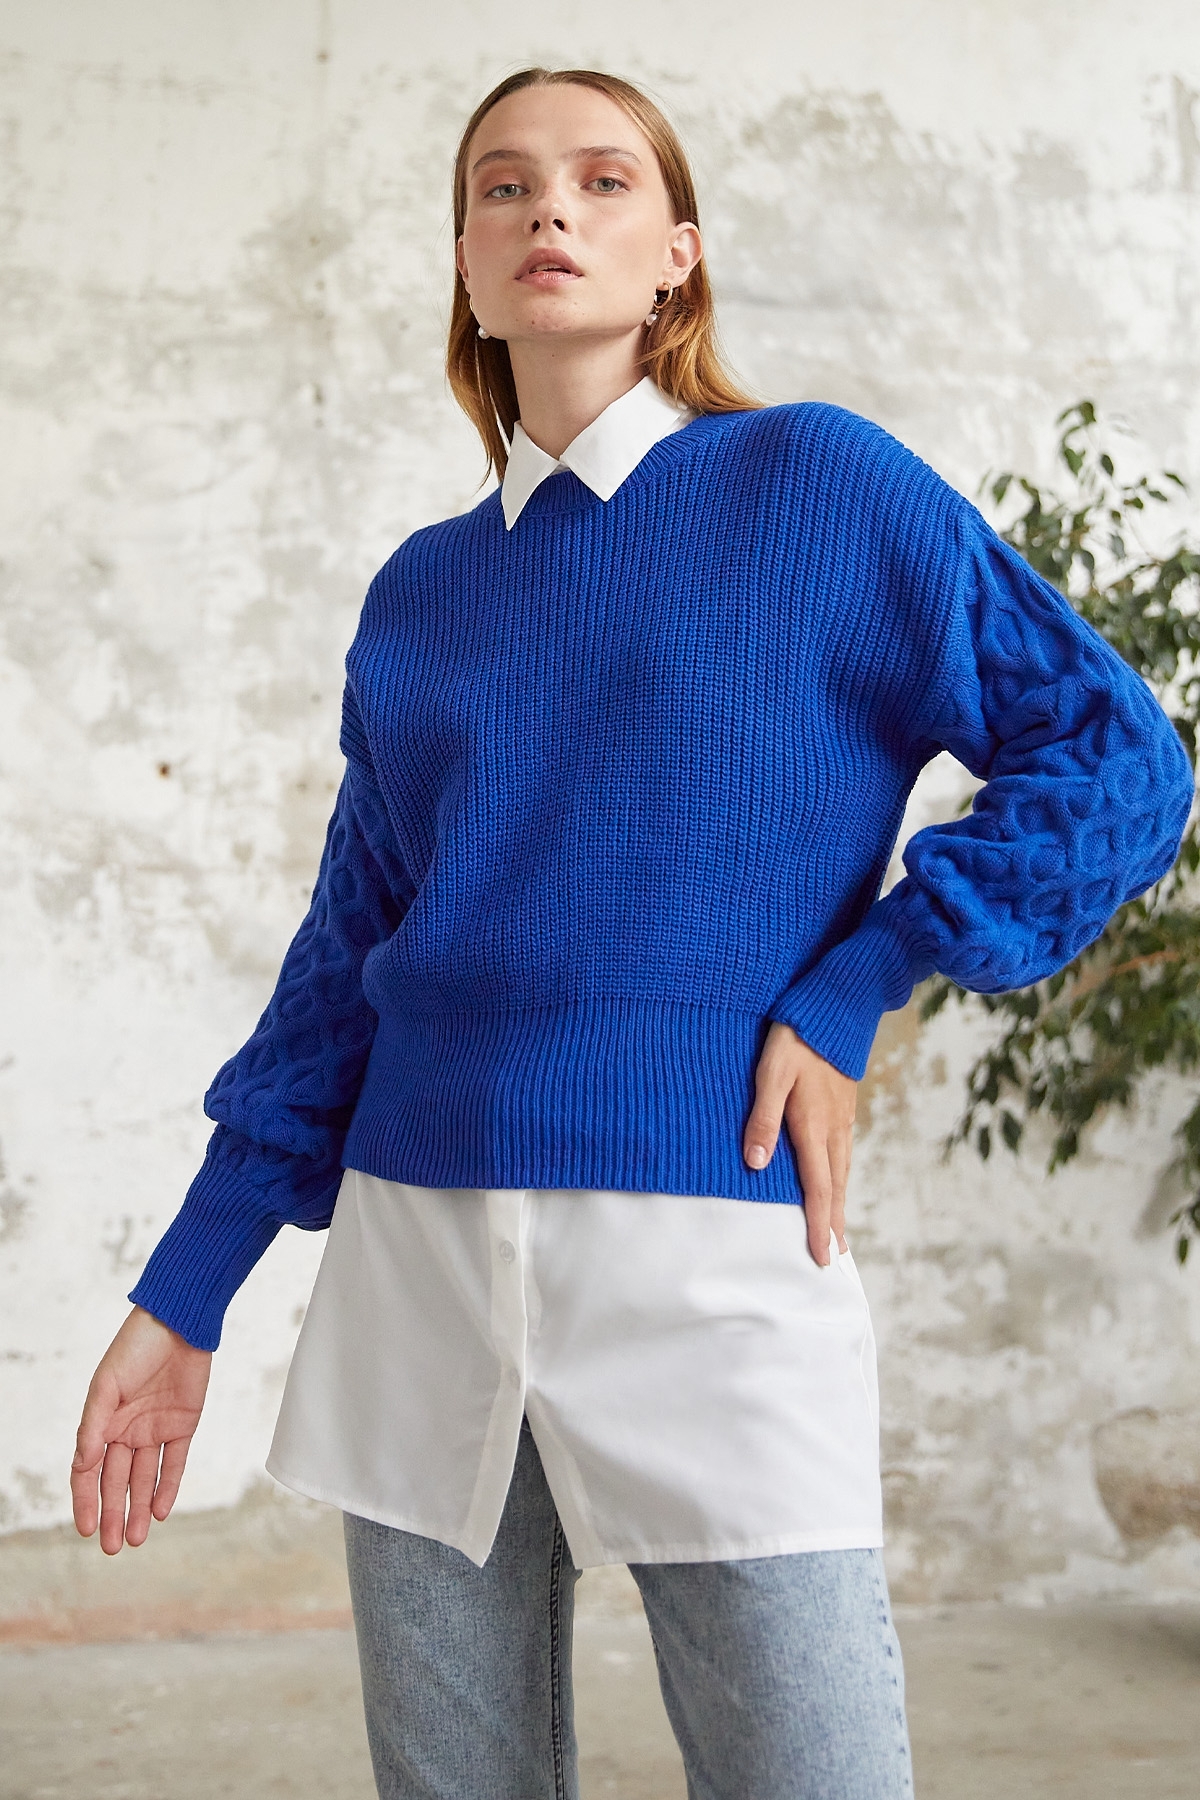 InStyle Noble Balloon Sleeve Knitwear Short Sweater - Saxe Blue